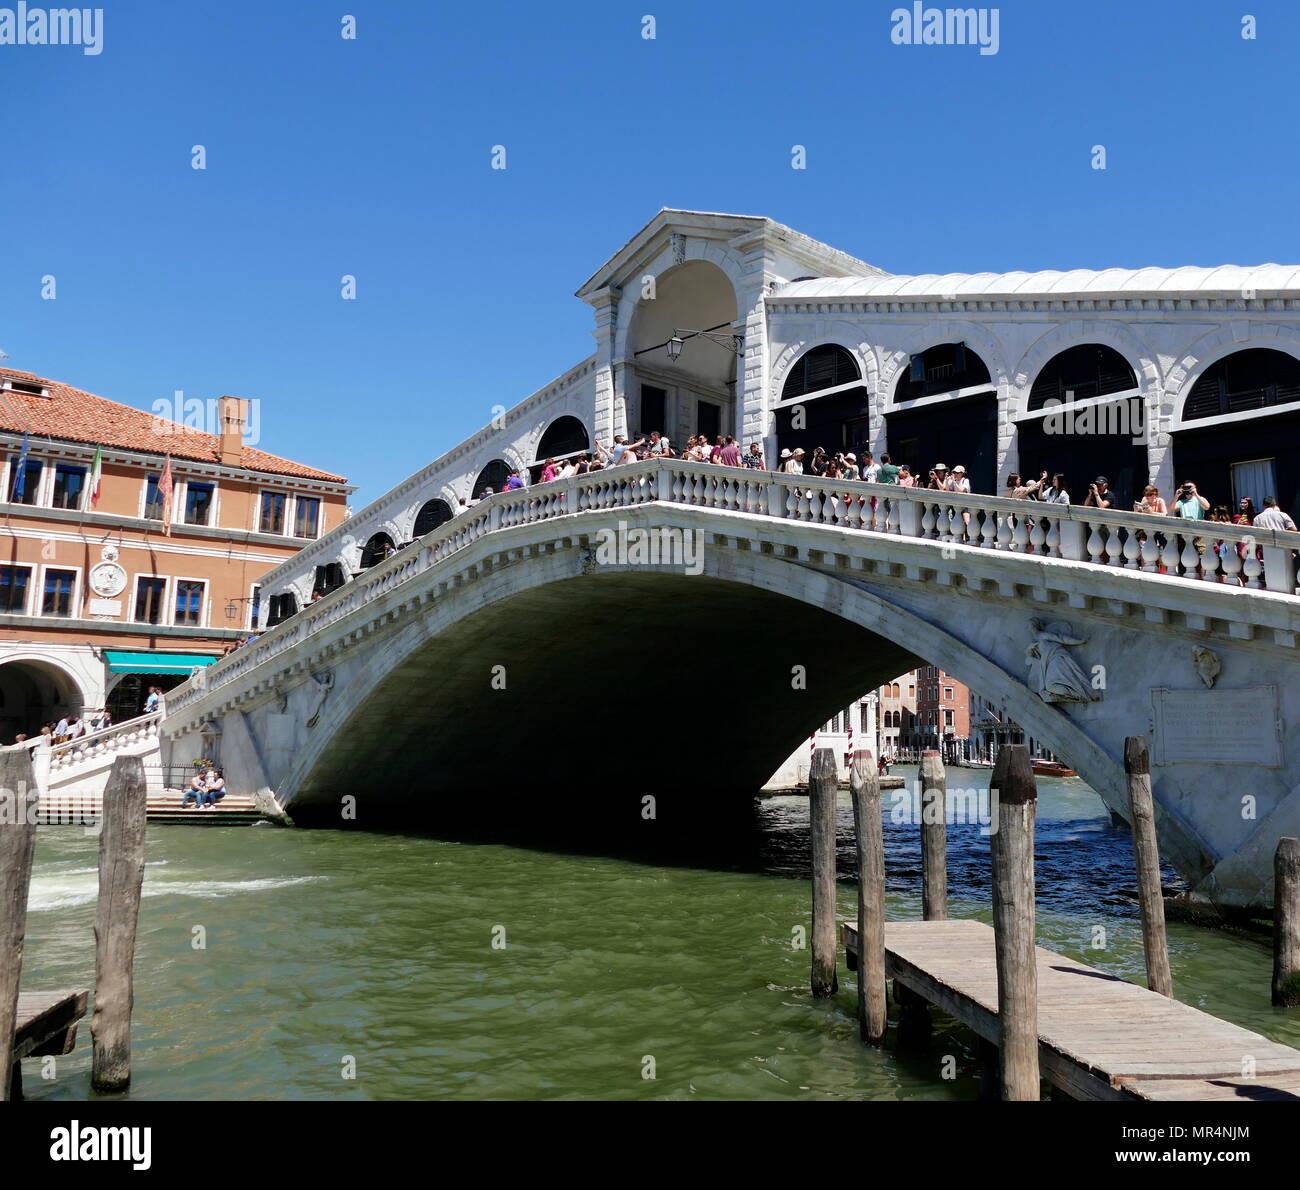 The Rialto Bridge (Ponte di Rialto), spanning the Grand Canal in Venice, Italy. It is the oldest bridge across the canal, and was the dividing line for the districts of San Marco and San Polo. The present stone bridge, a single span designed by Antonio da Ponte, was finally completed in 1591. Stock Photo